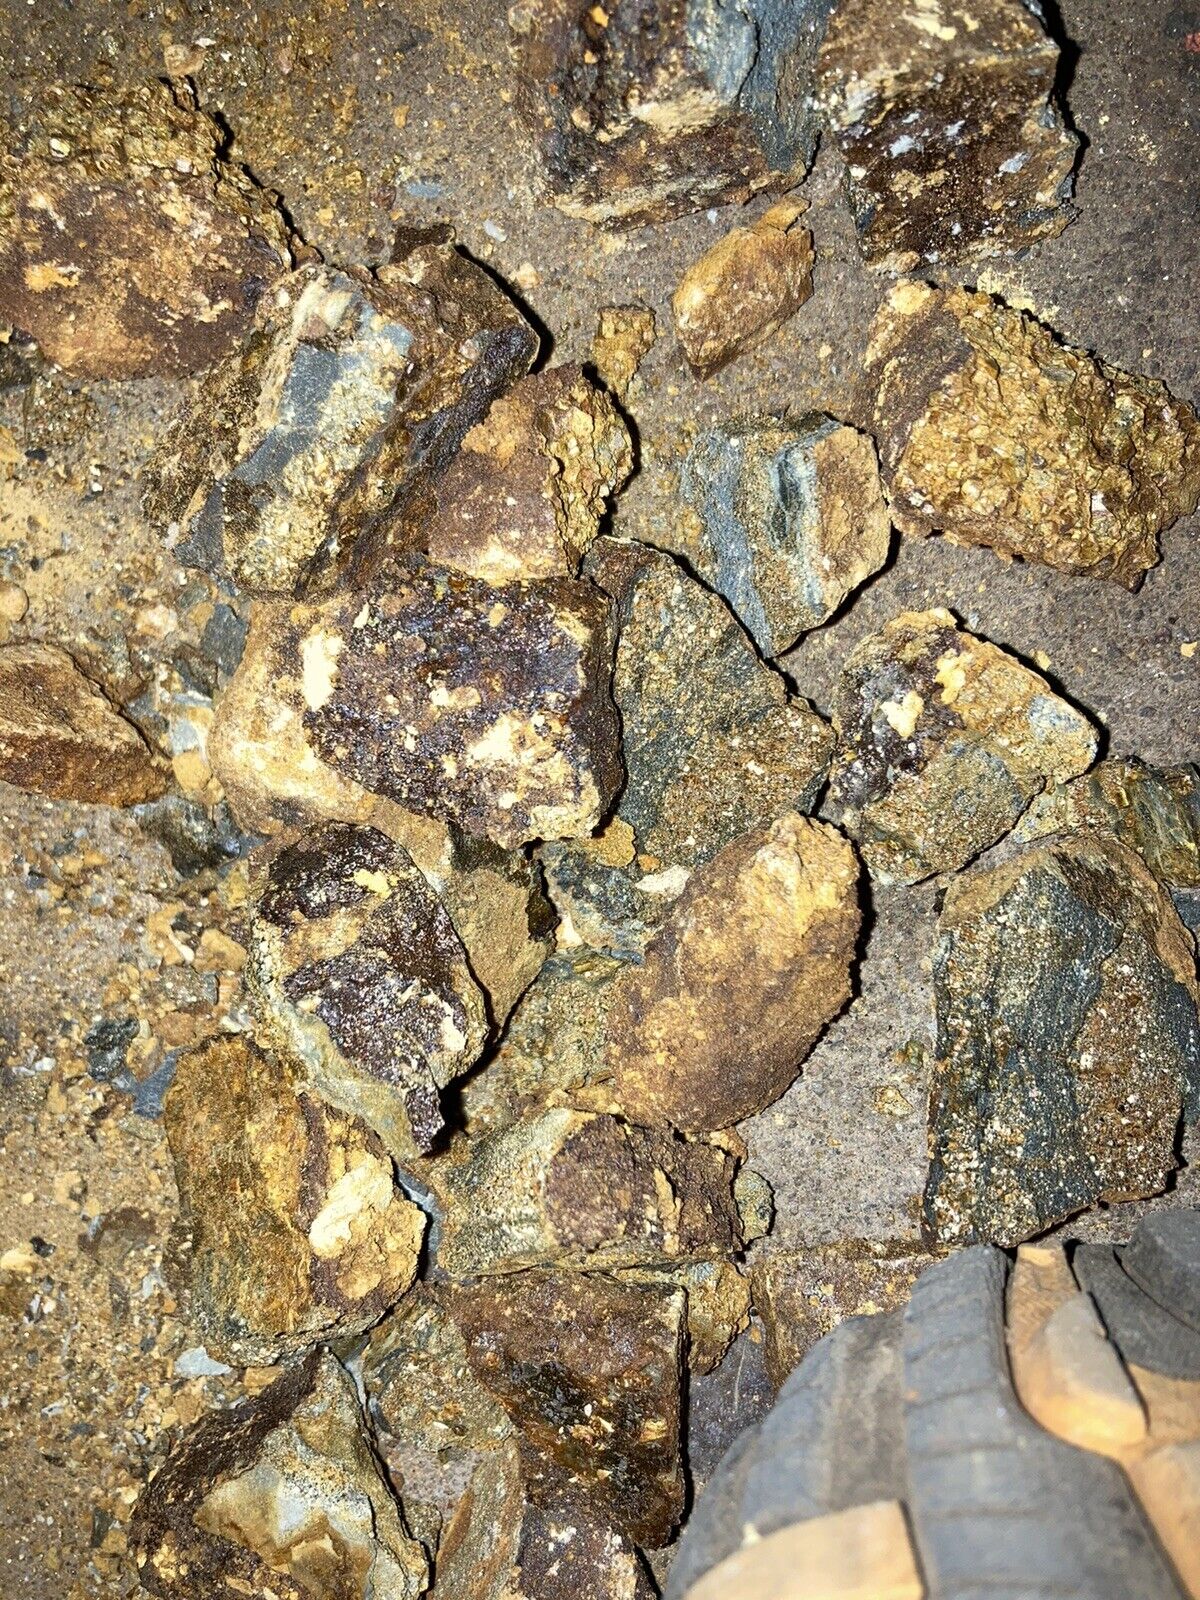 70lbs (31.75kilogram) of super rich and juicy green shale gold ore